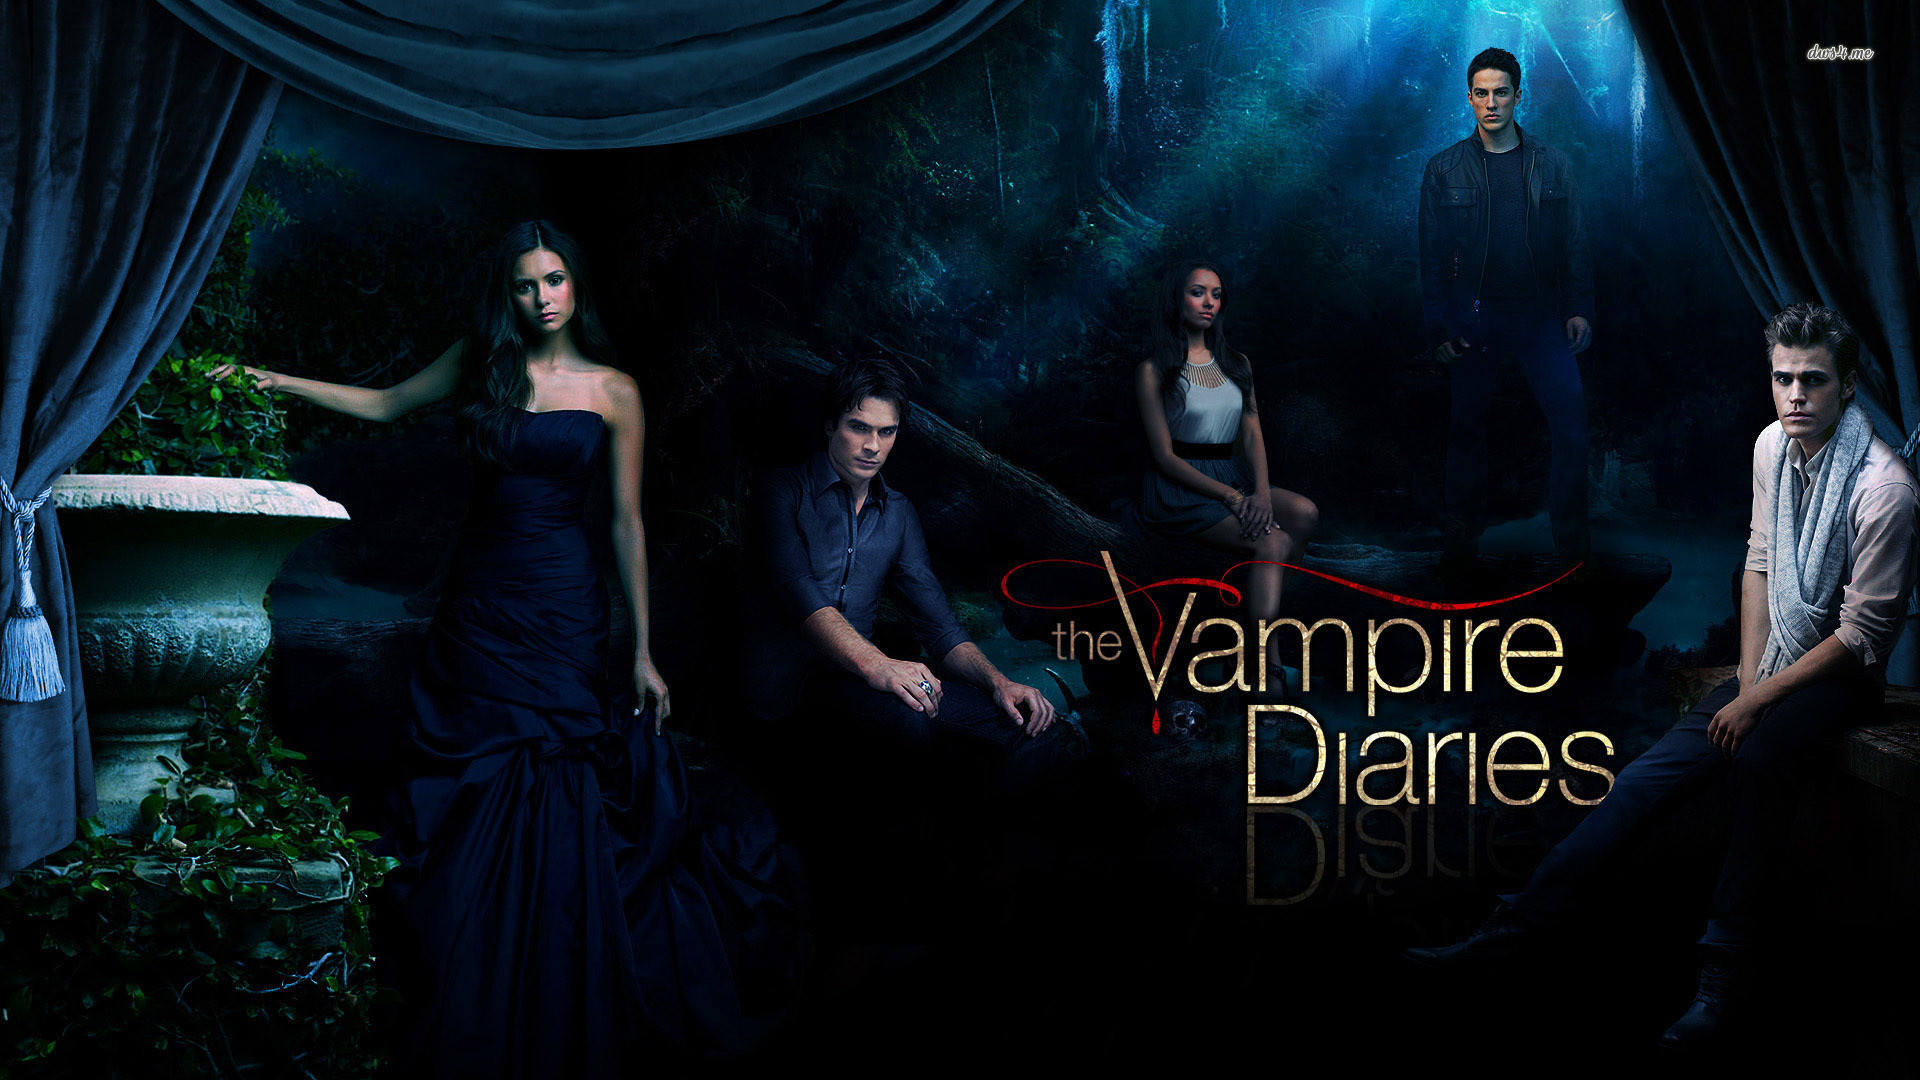 1920x1080 The Vampire Diaries images TVD HD wallpaper and background photos